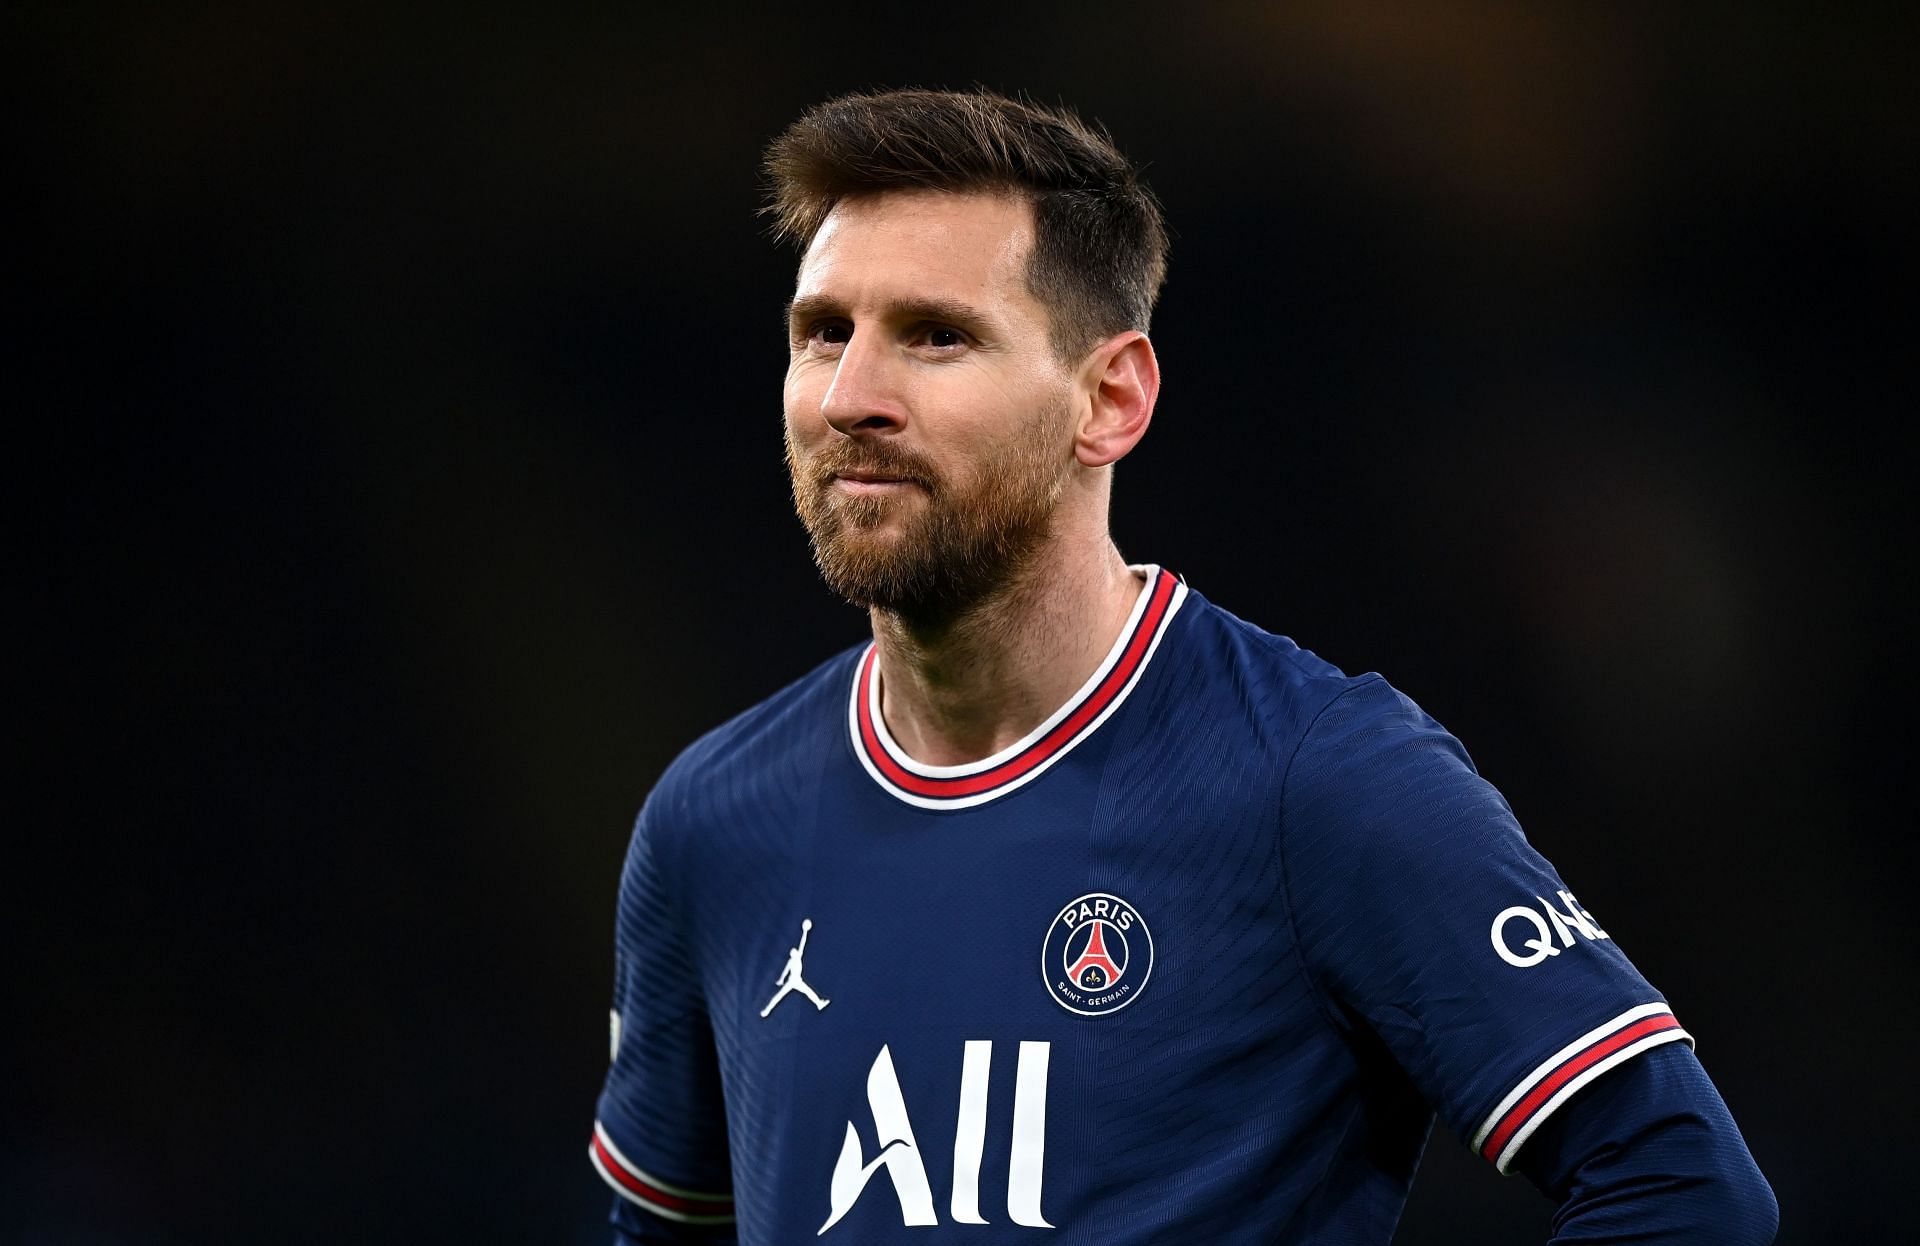 Lionel Messi has not enjoyed the ideal start to his PSG career.